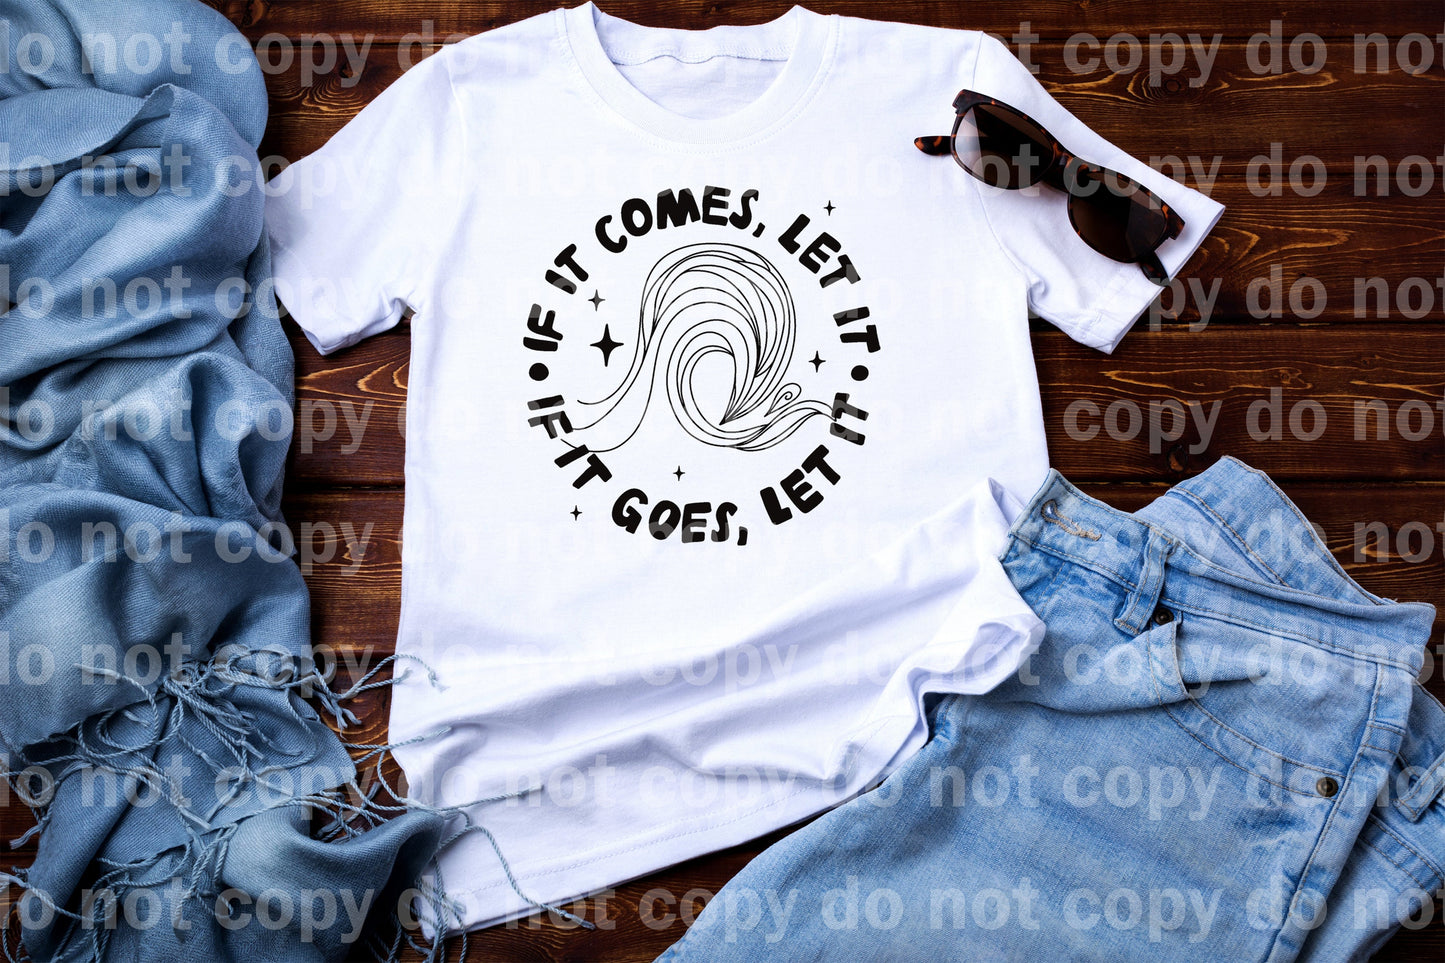 If It Comes Let It If It Goes Let It Dream Print or Sublimation Print